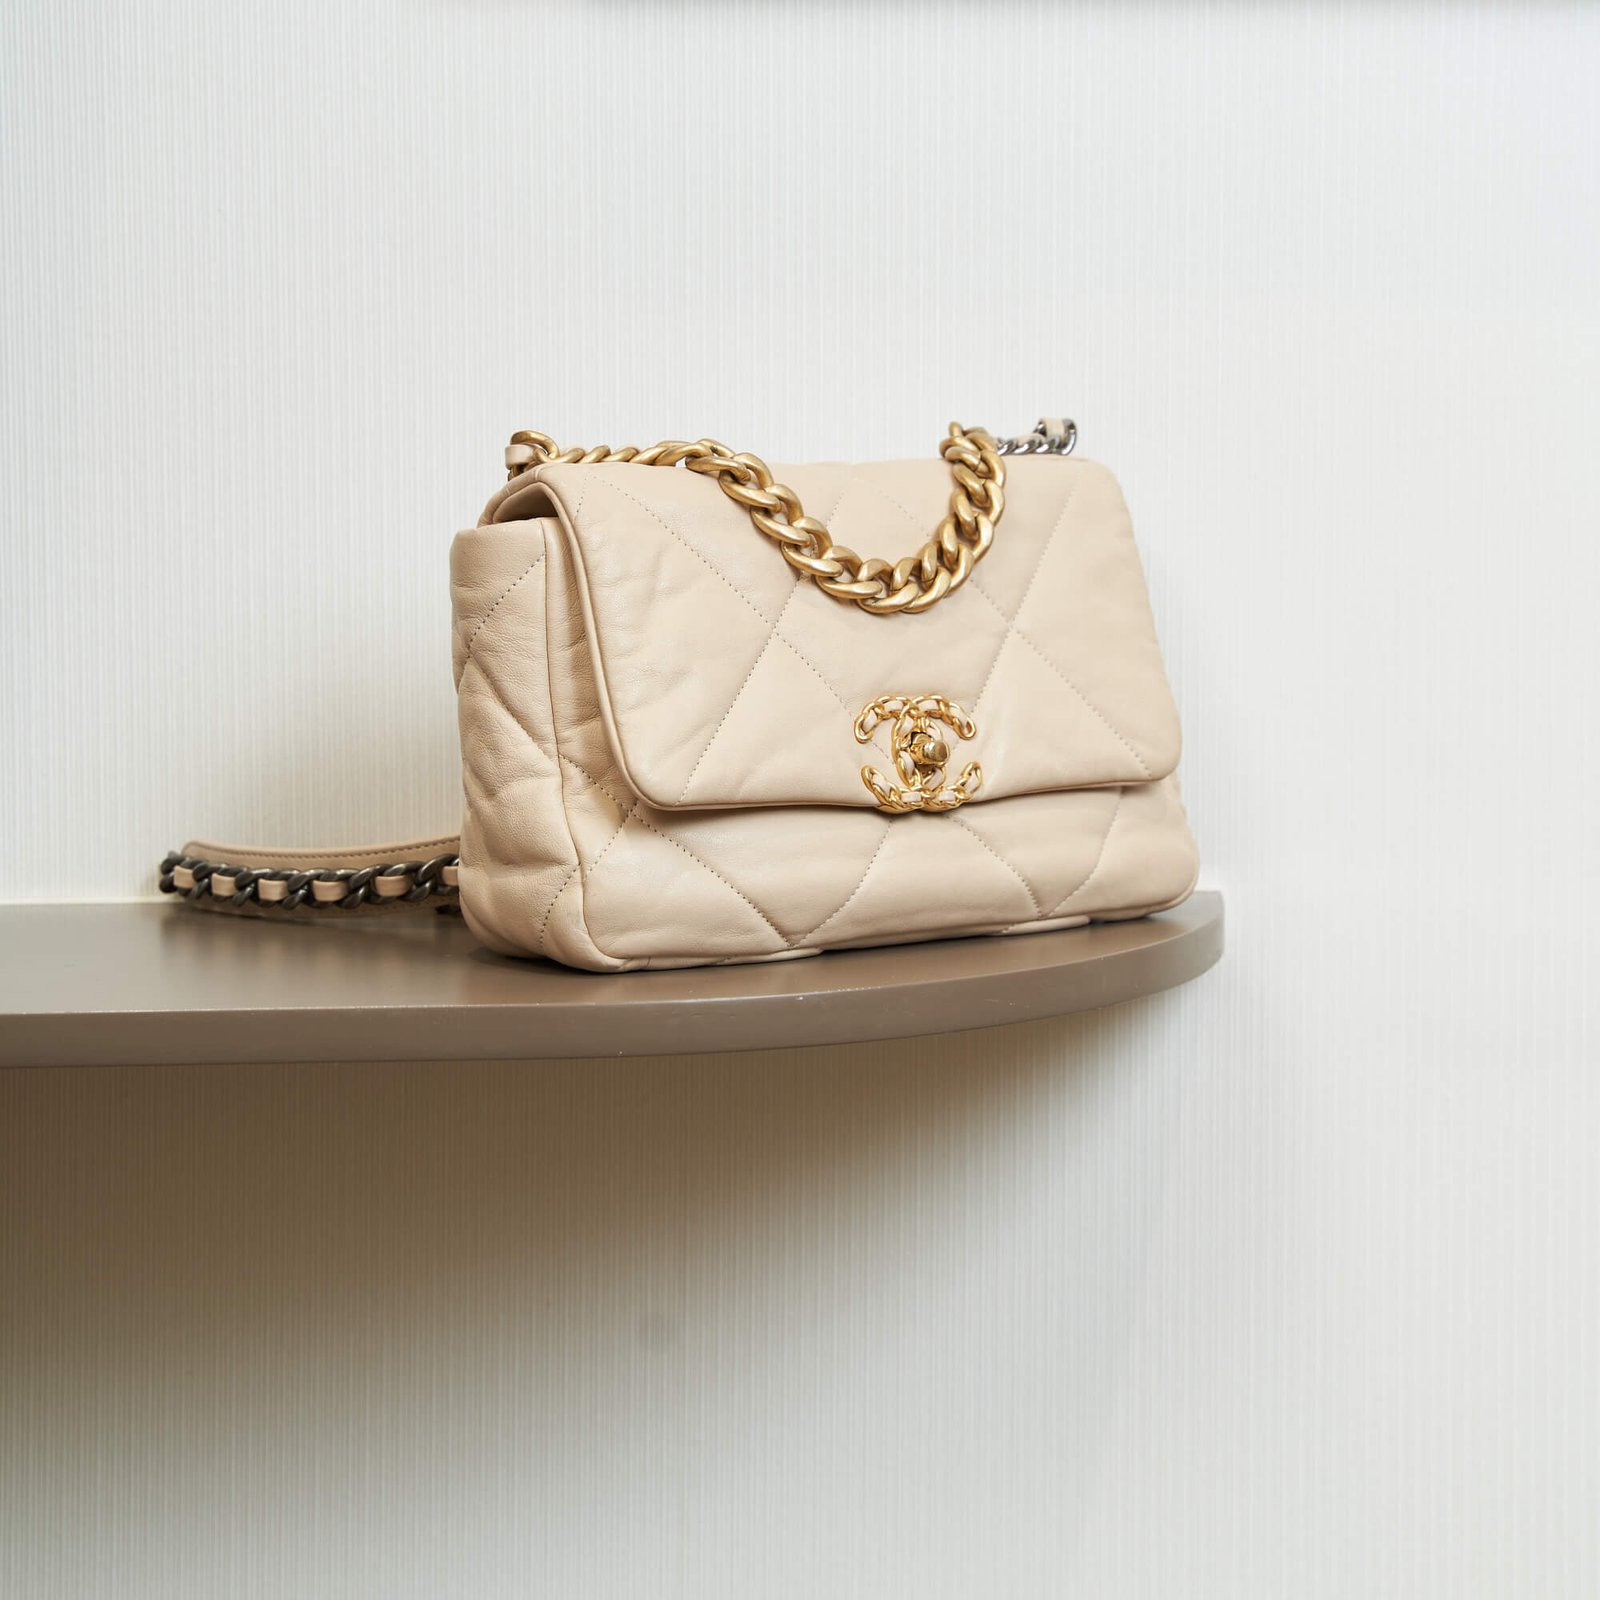 Chanel 19 Large Flap Bag in Cream Lambskin with Tricolore Hardware  SOLD